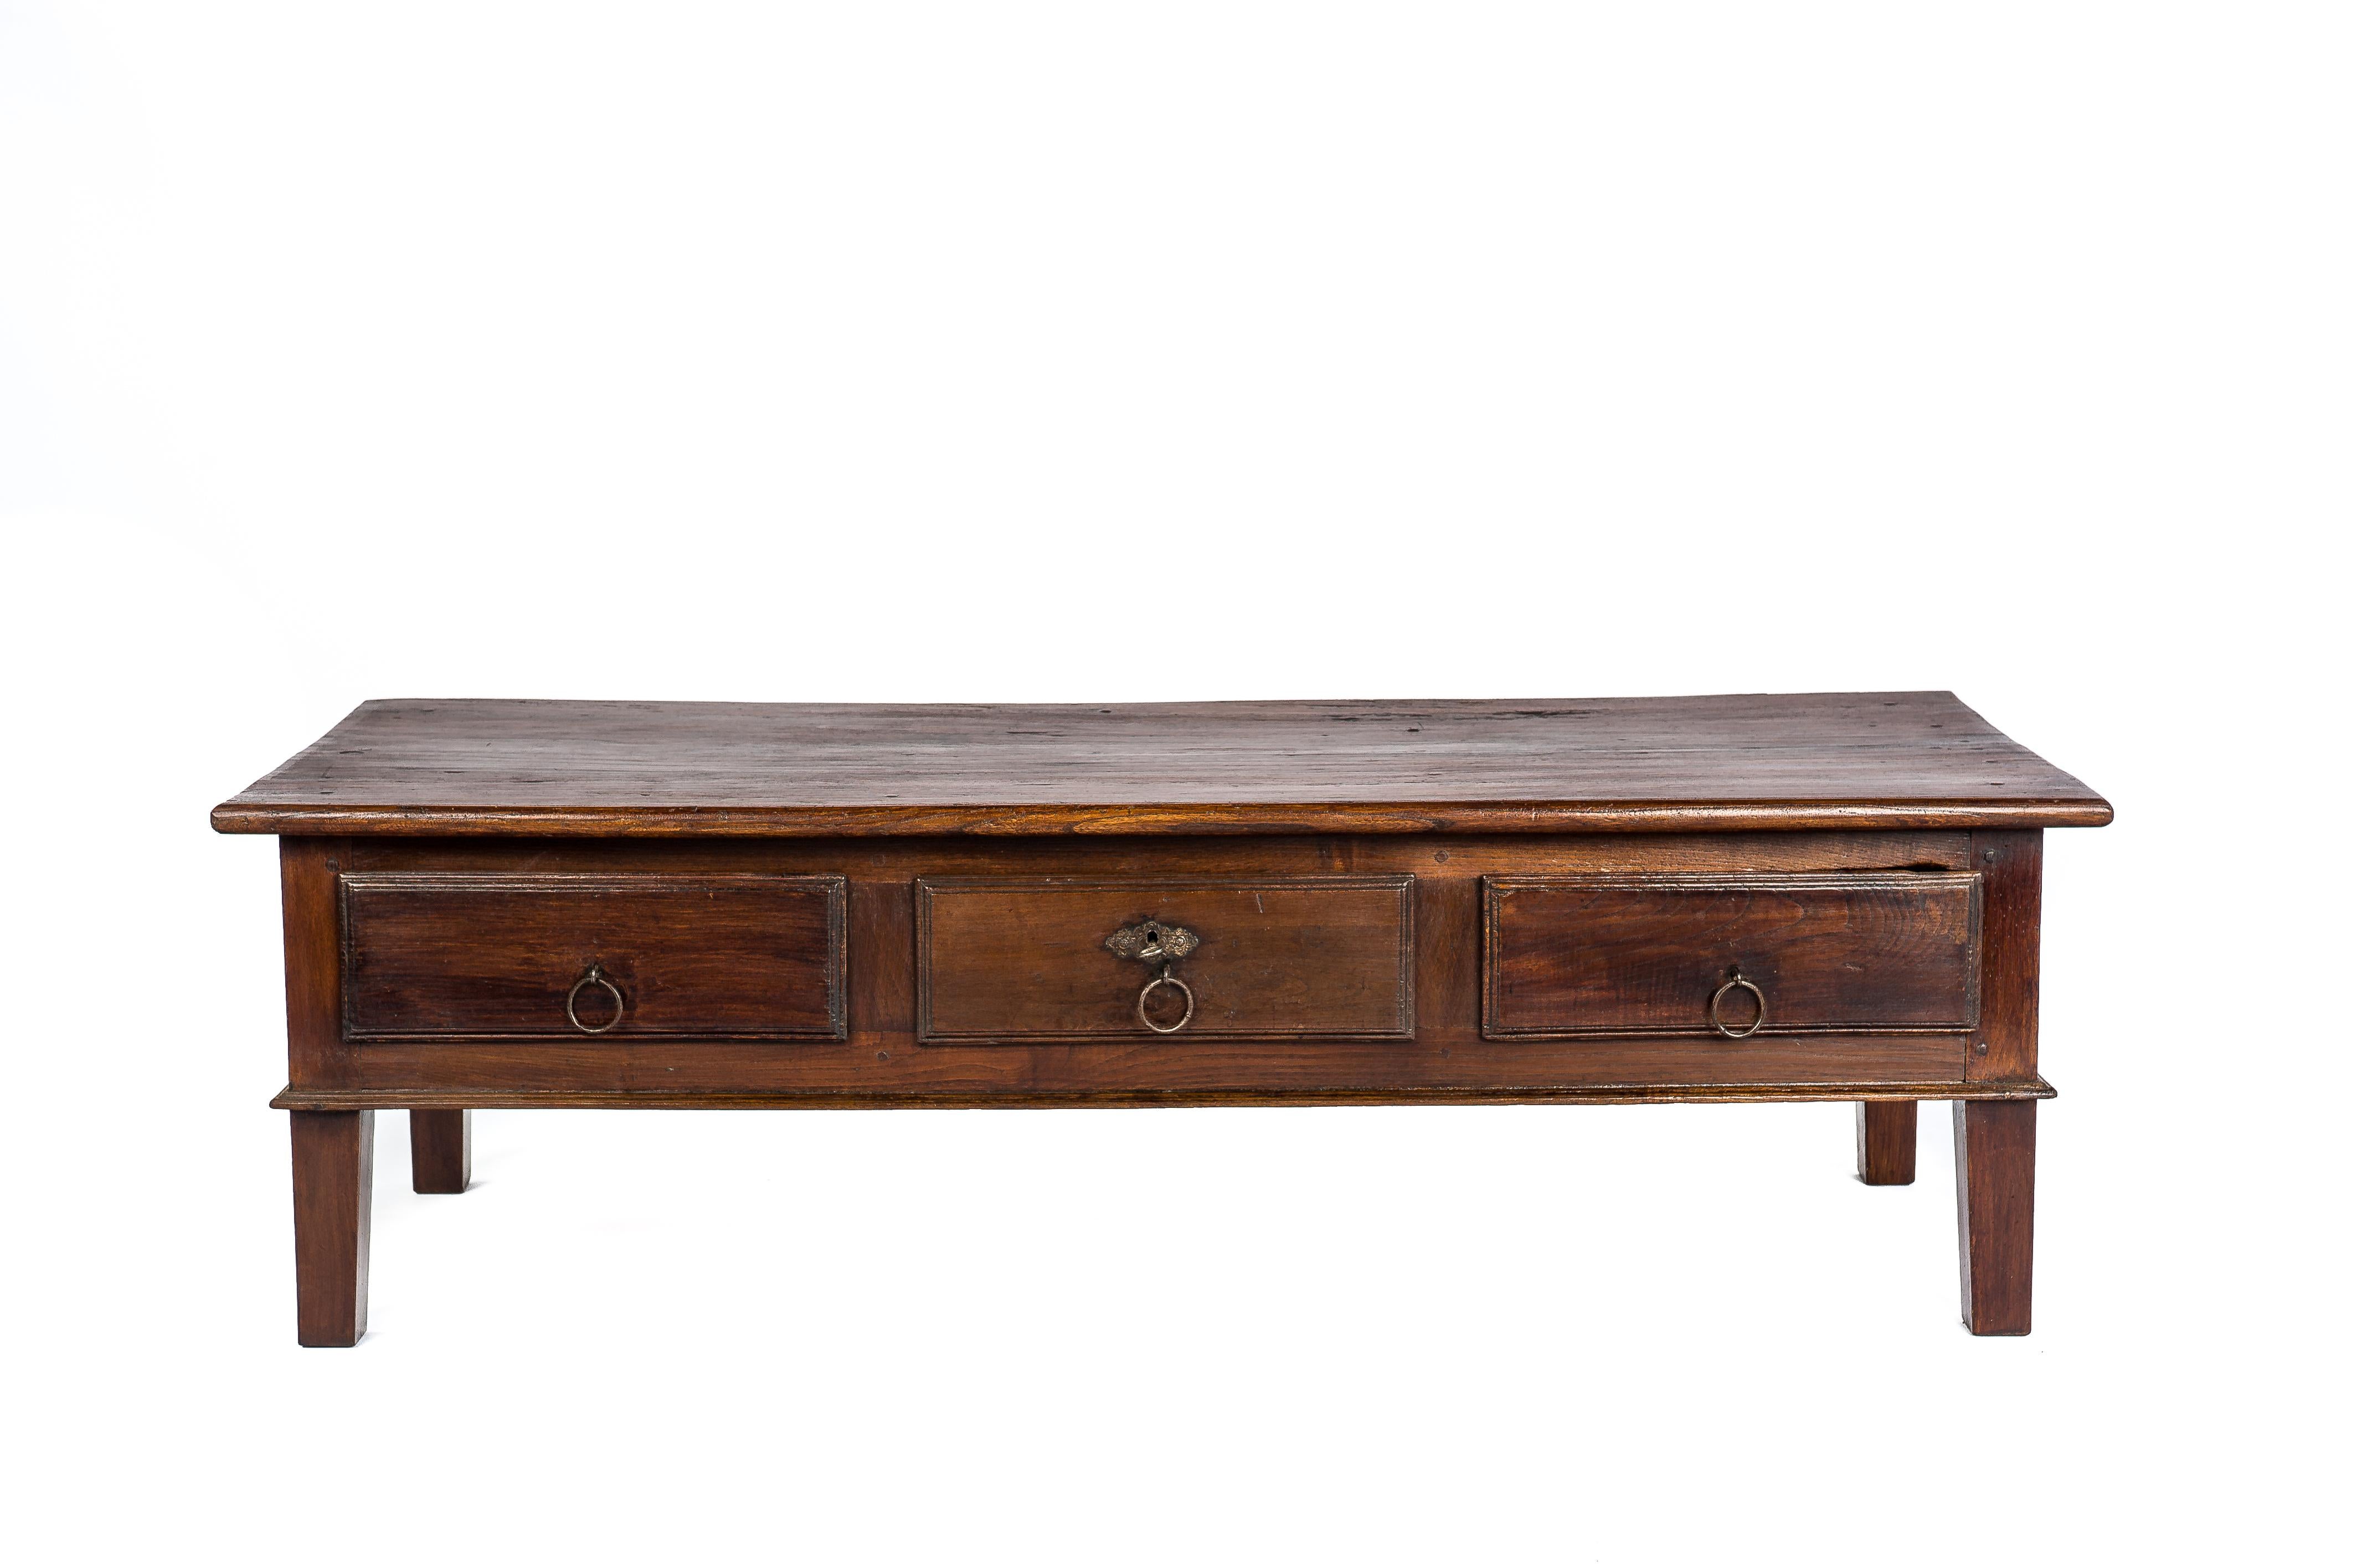 This beautiful warm brown rustic coffee table or low table originates in Spain and dates circa 1850. The table has a beautiful top that was made from a single board of solid elm and displays a wonderful grain pattern. The top has a beautiful patina